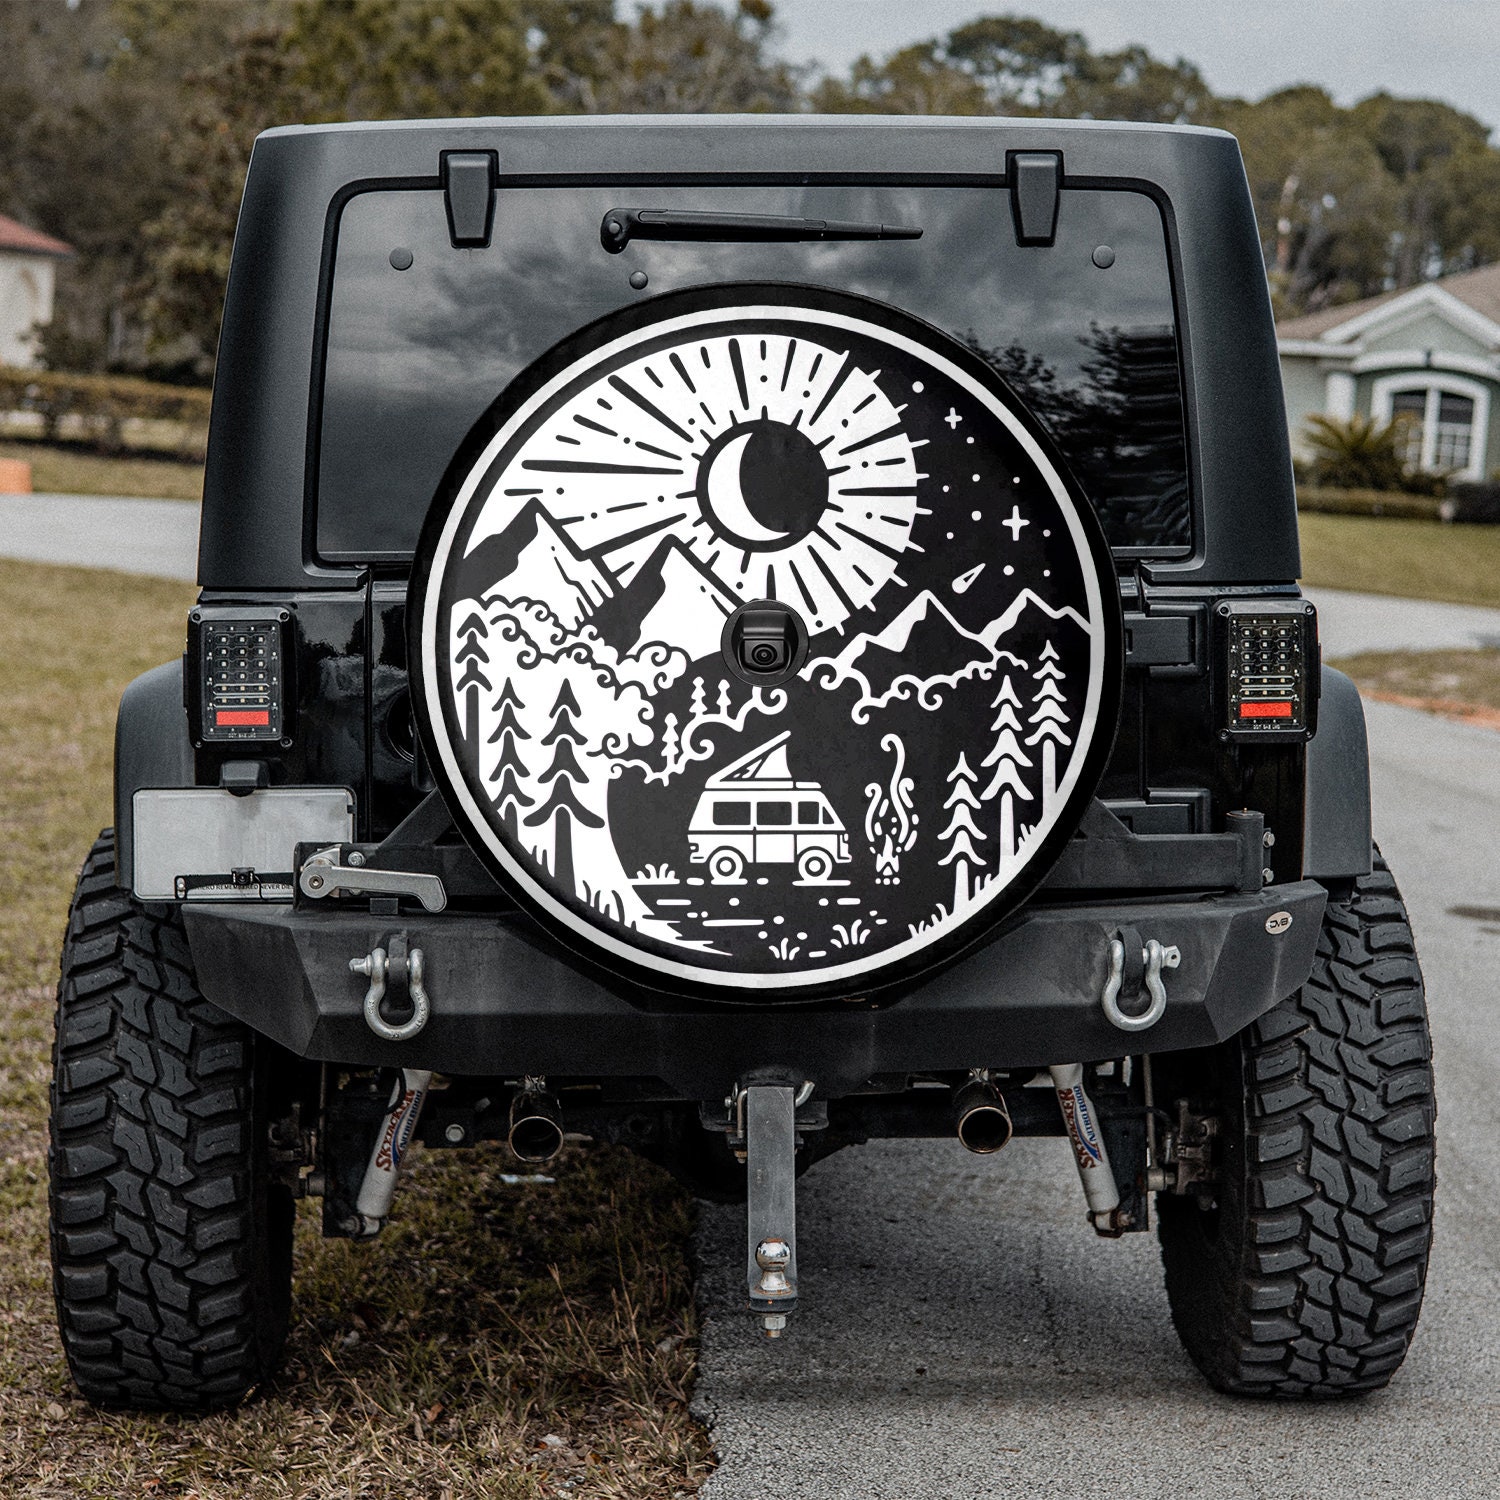 Ying And Yang Spare Tire Cover With Or Without Camera Hole